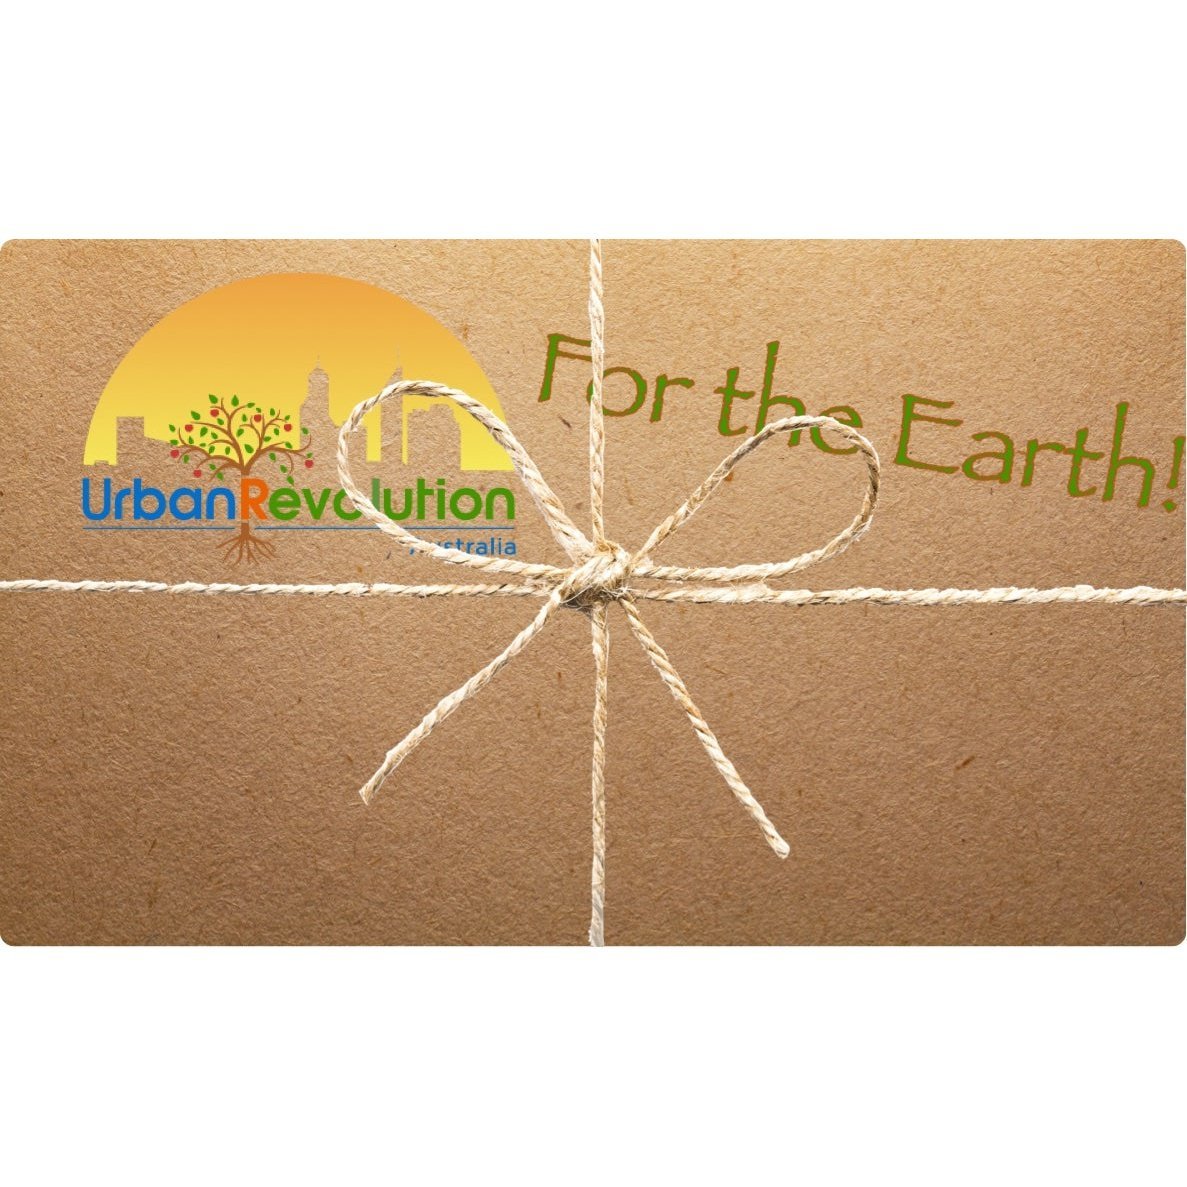 Urban Revolution Gift Card - For the Earth!